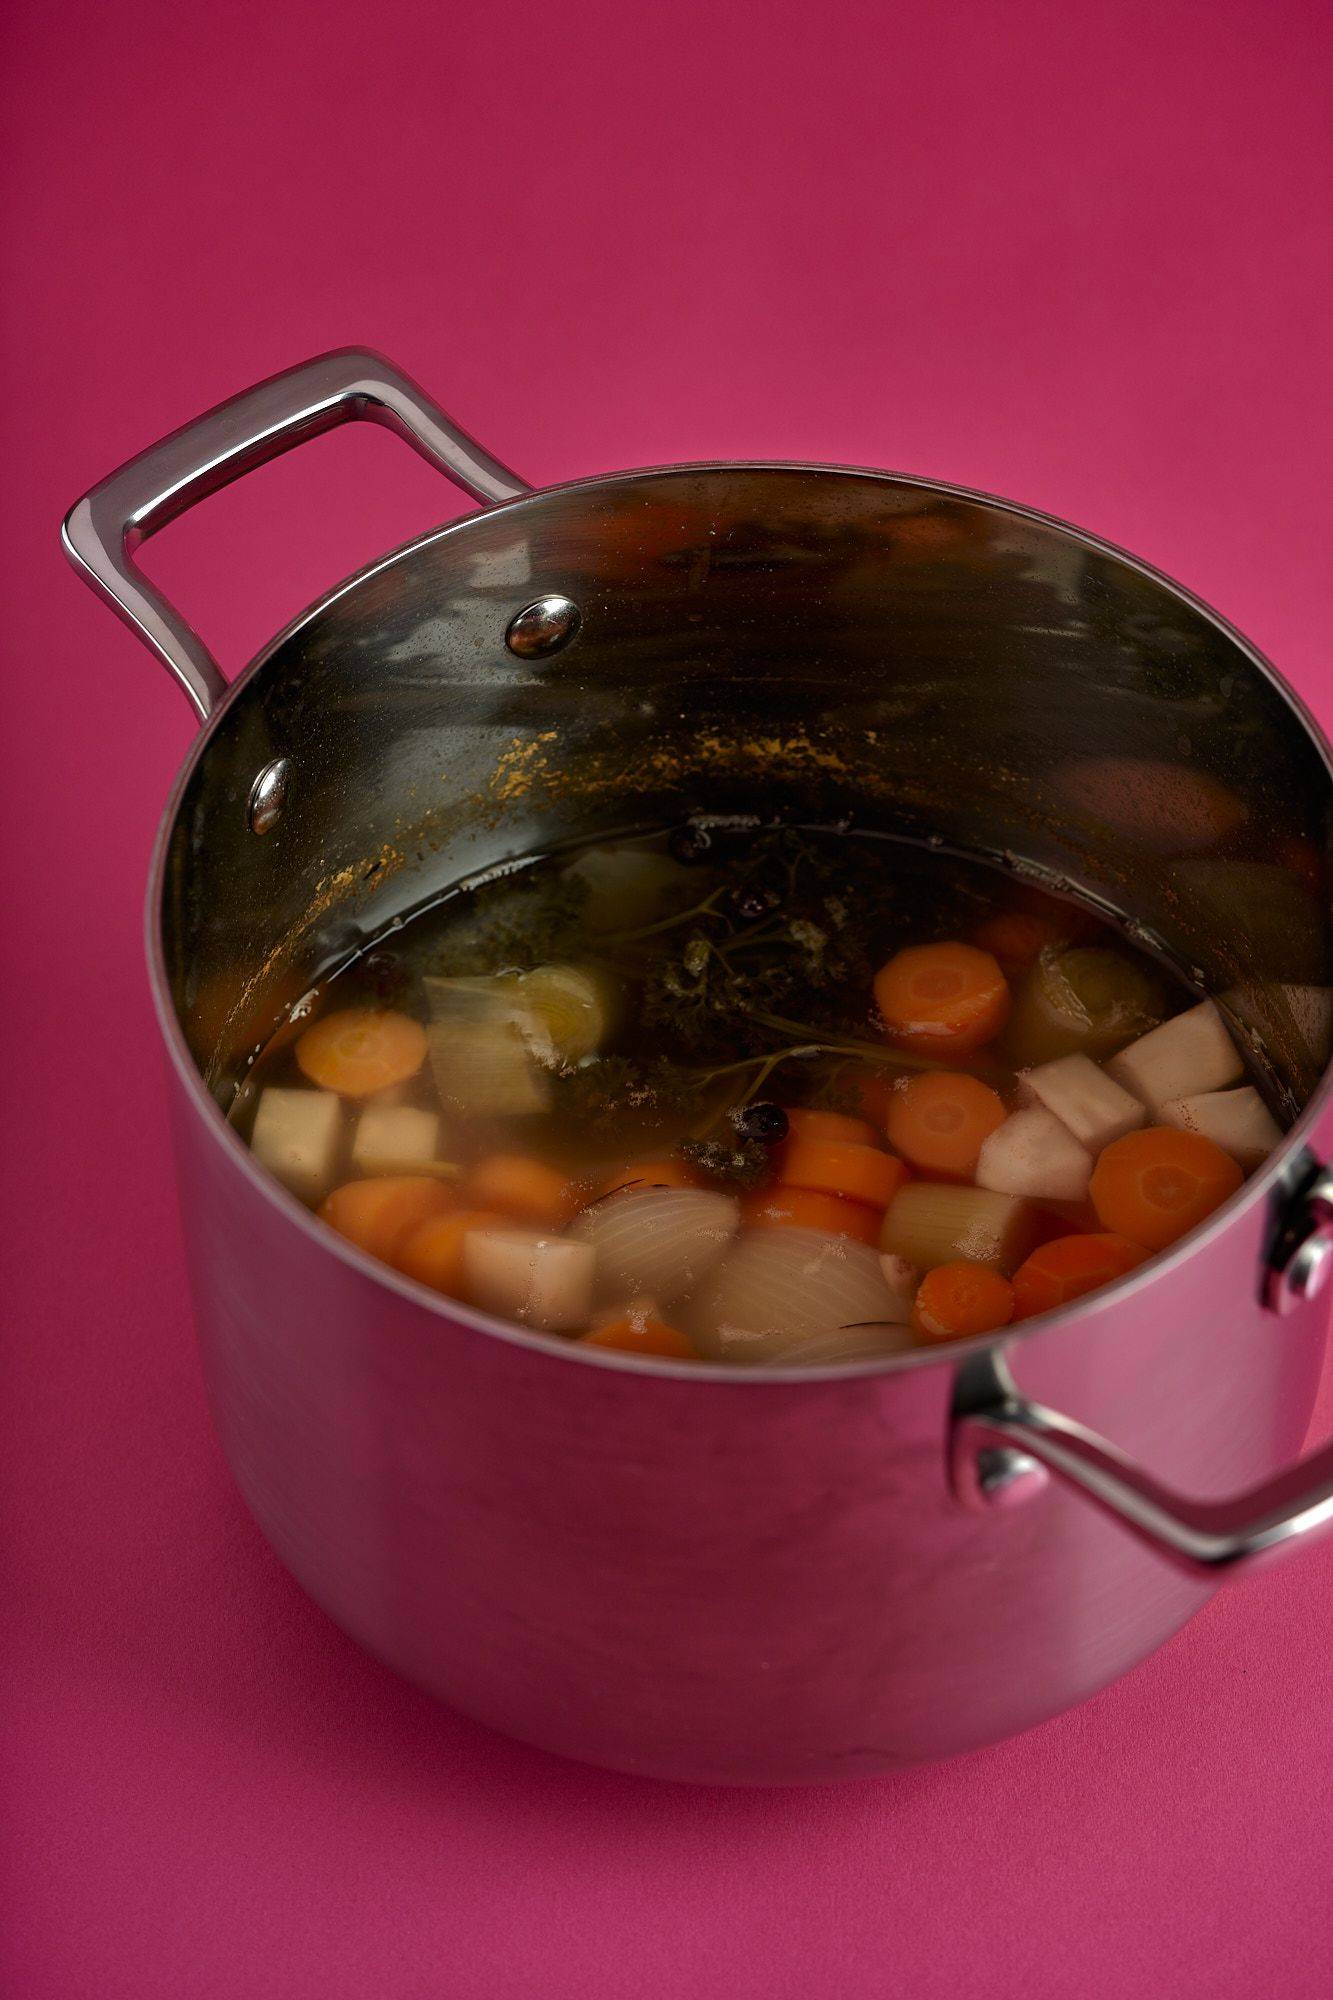 a silver pot with vegetable broth on pink background